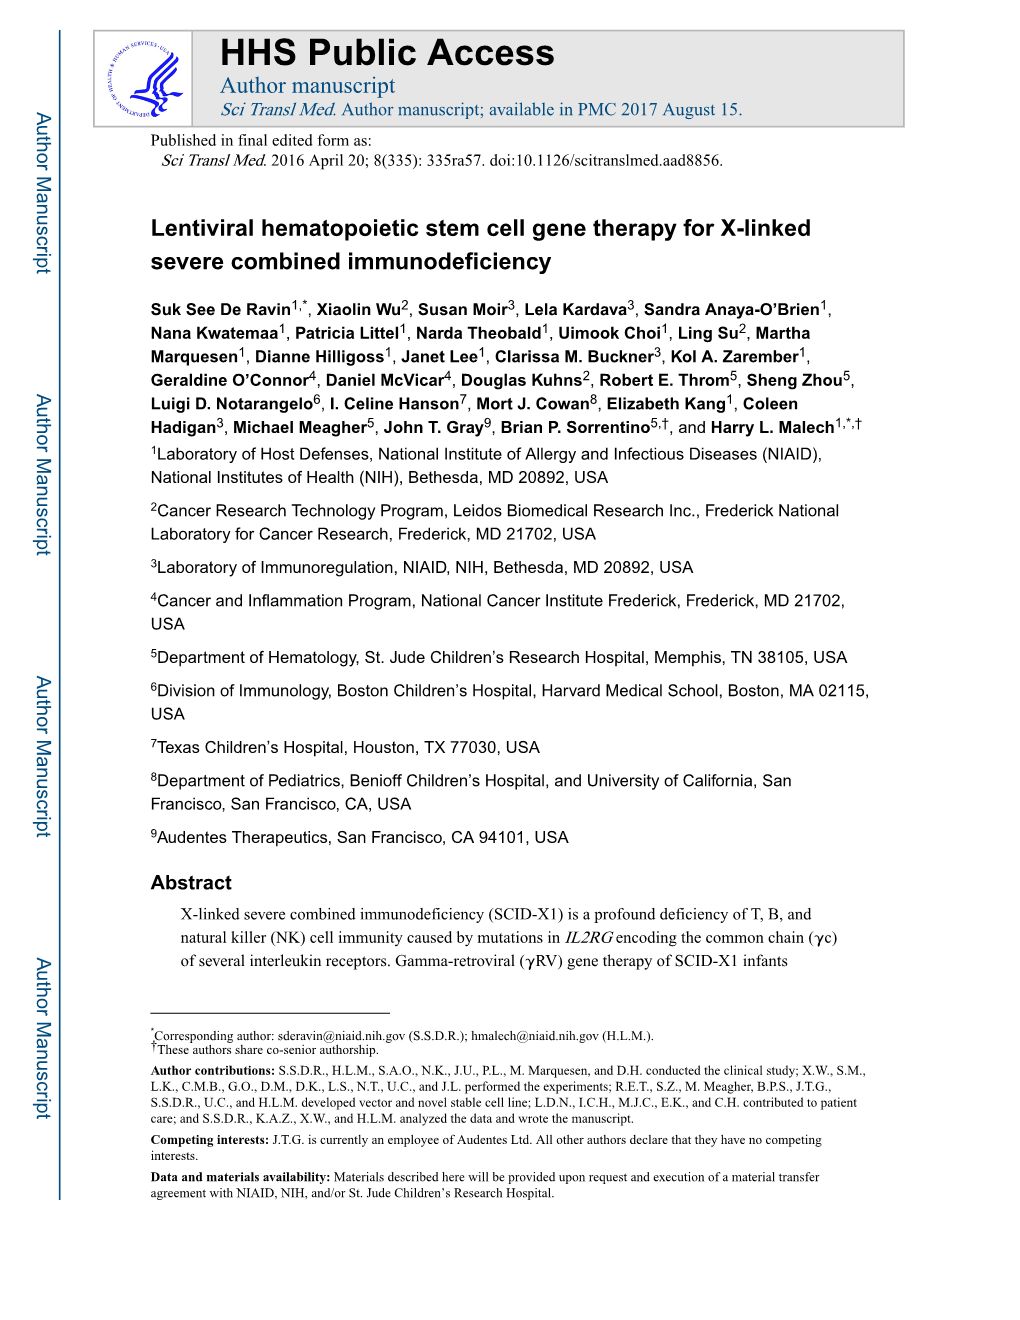 Lentiviral Hematopoietic Stem Cell Gene Therapy for X-Linked Severe Combined Immunodeficiency